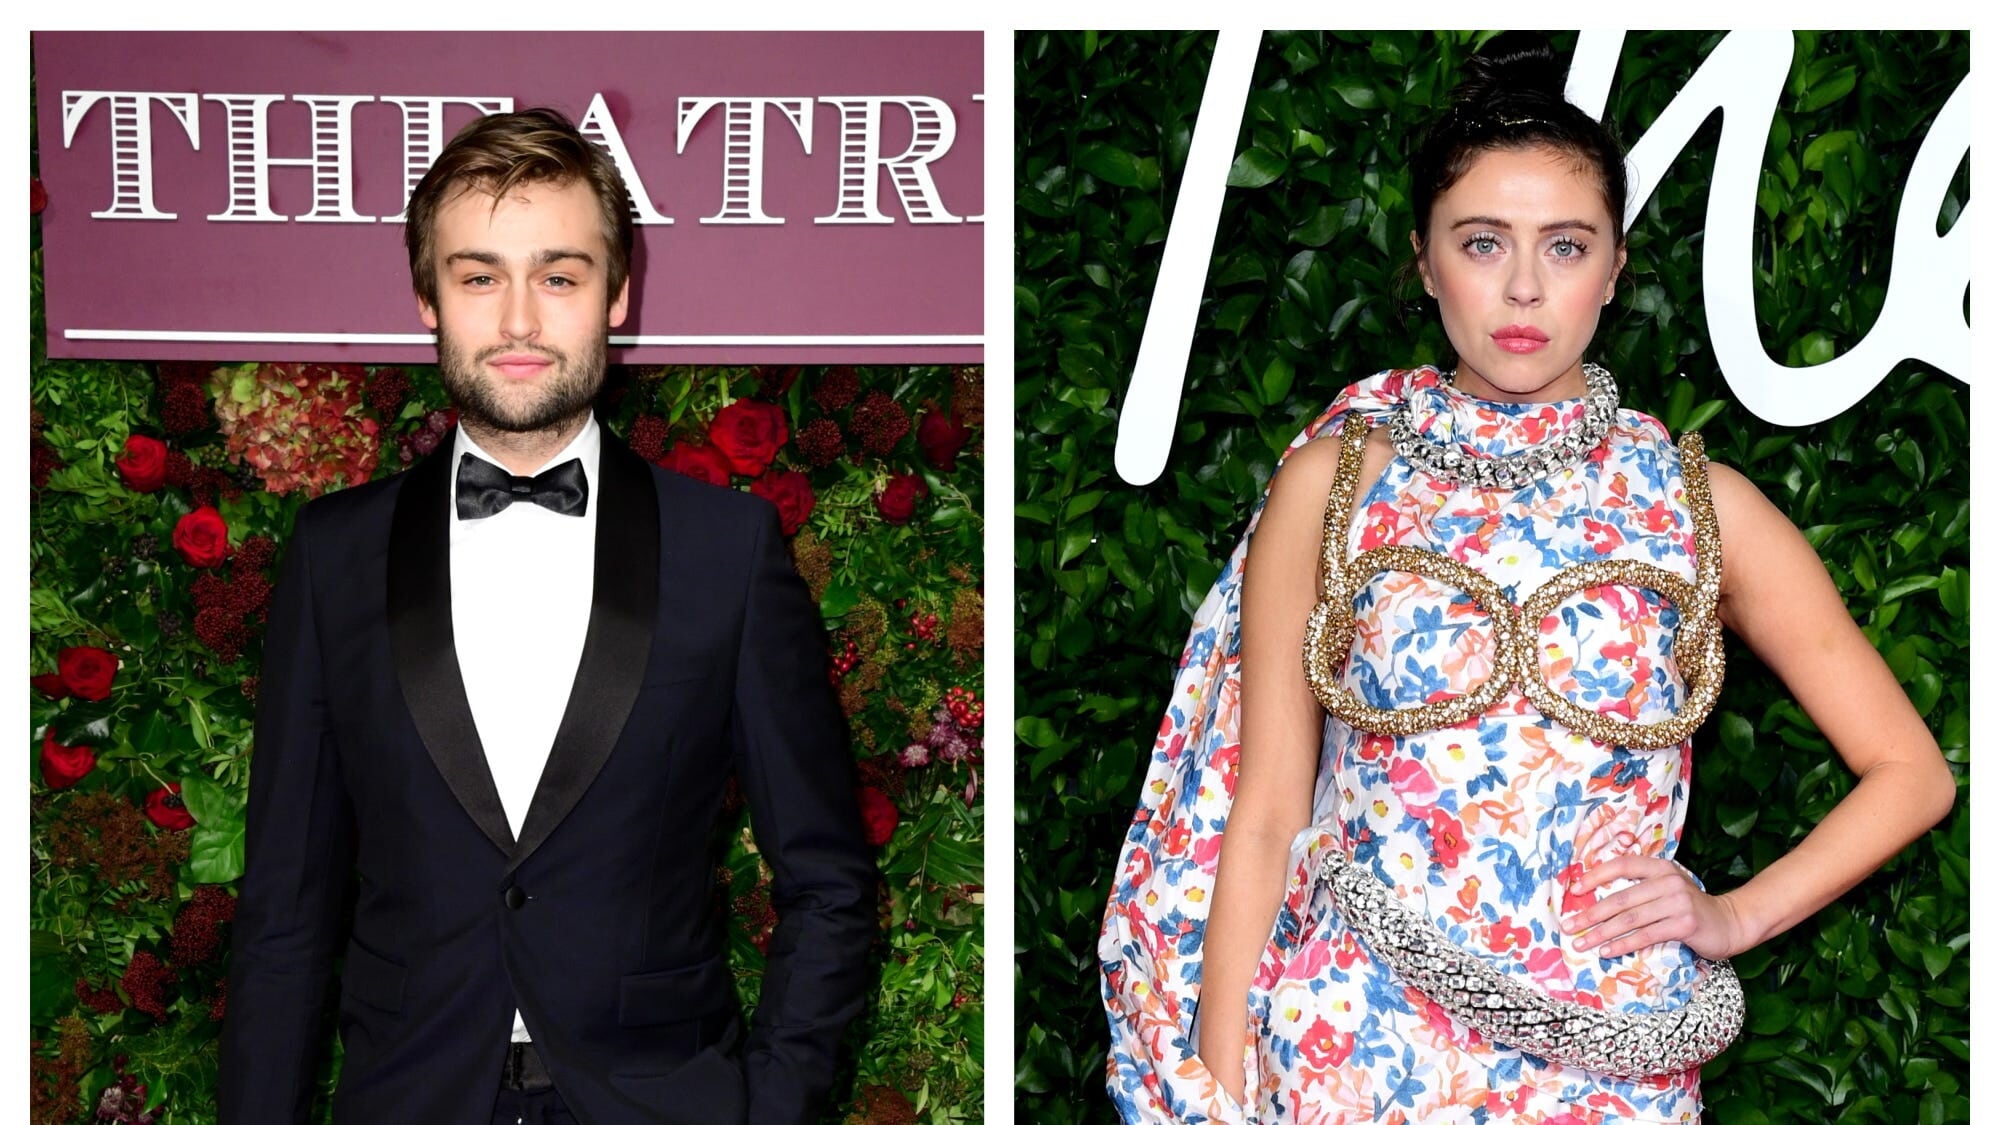 Bel Powley and Douglas Booth share intimate details of glitzy London wedding (PA)